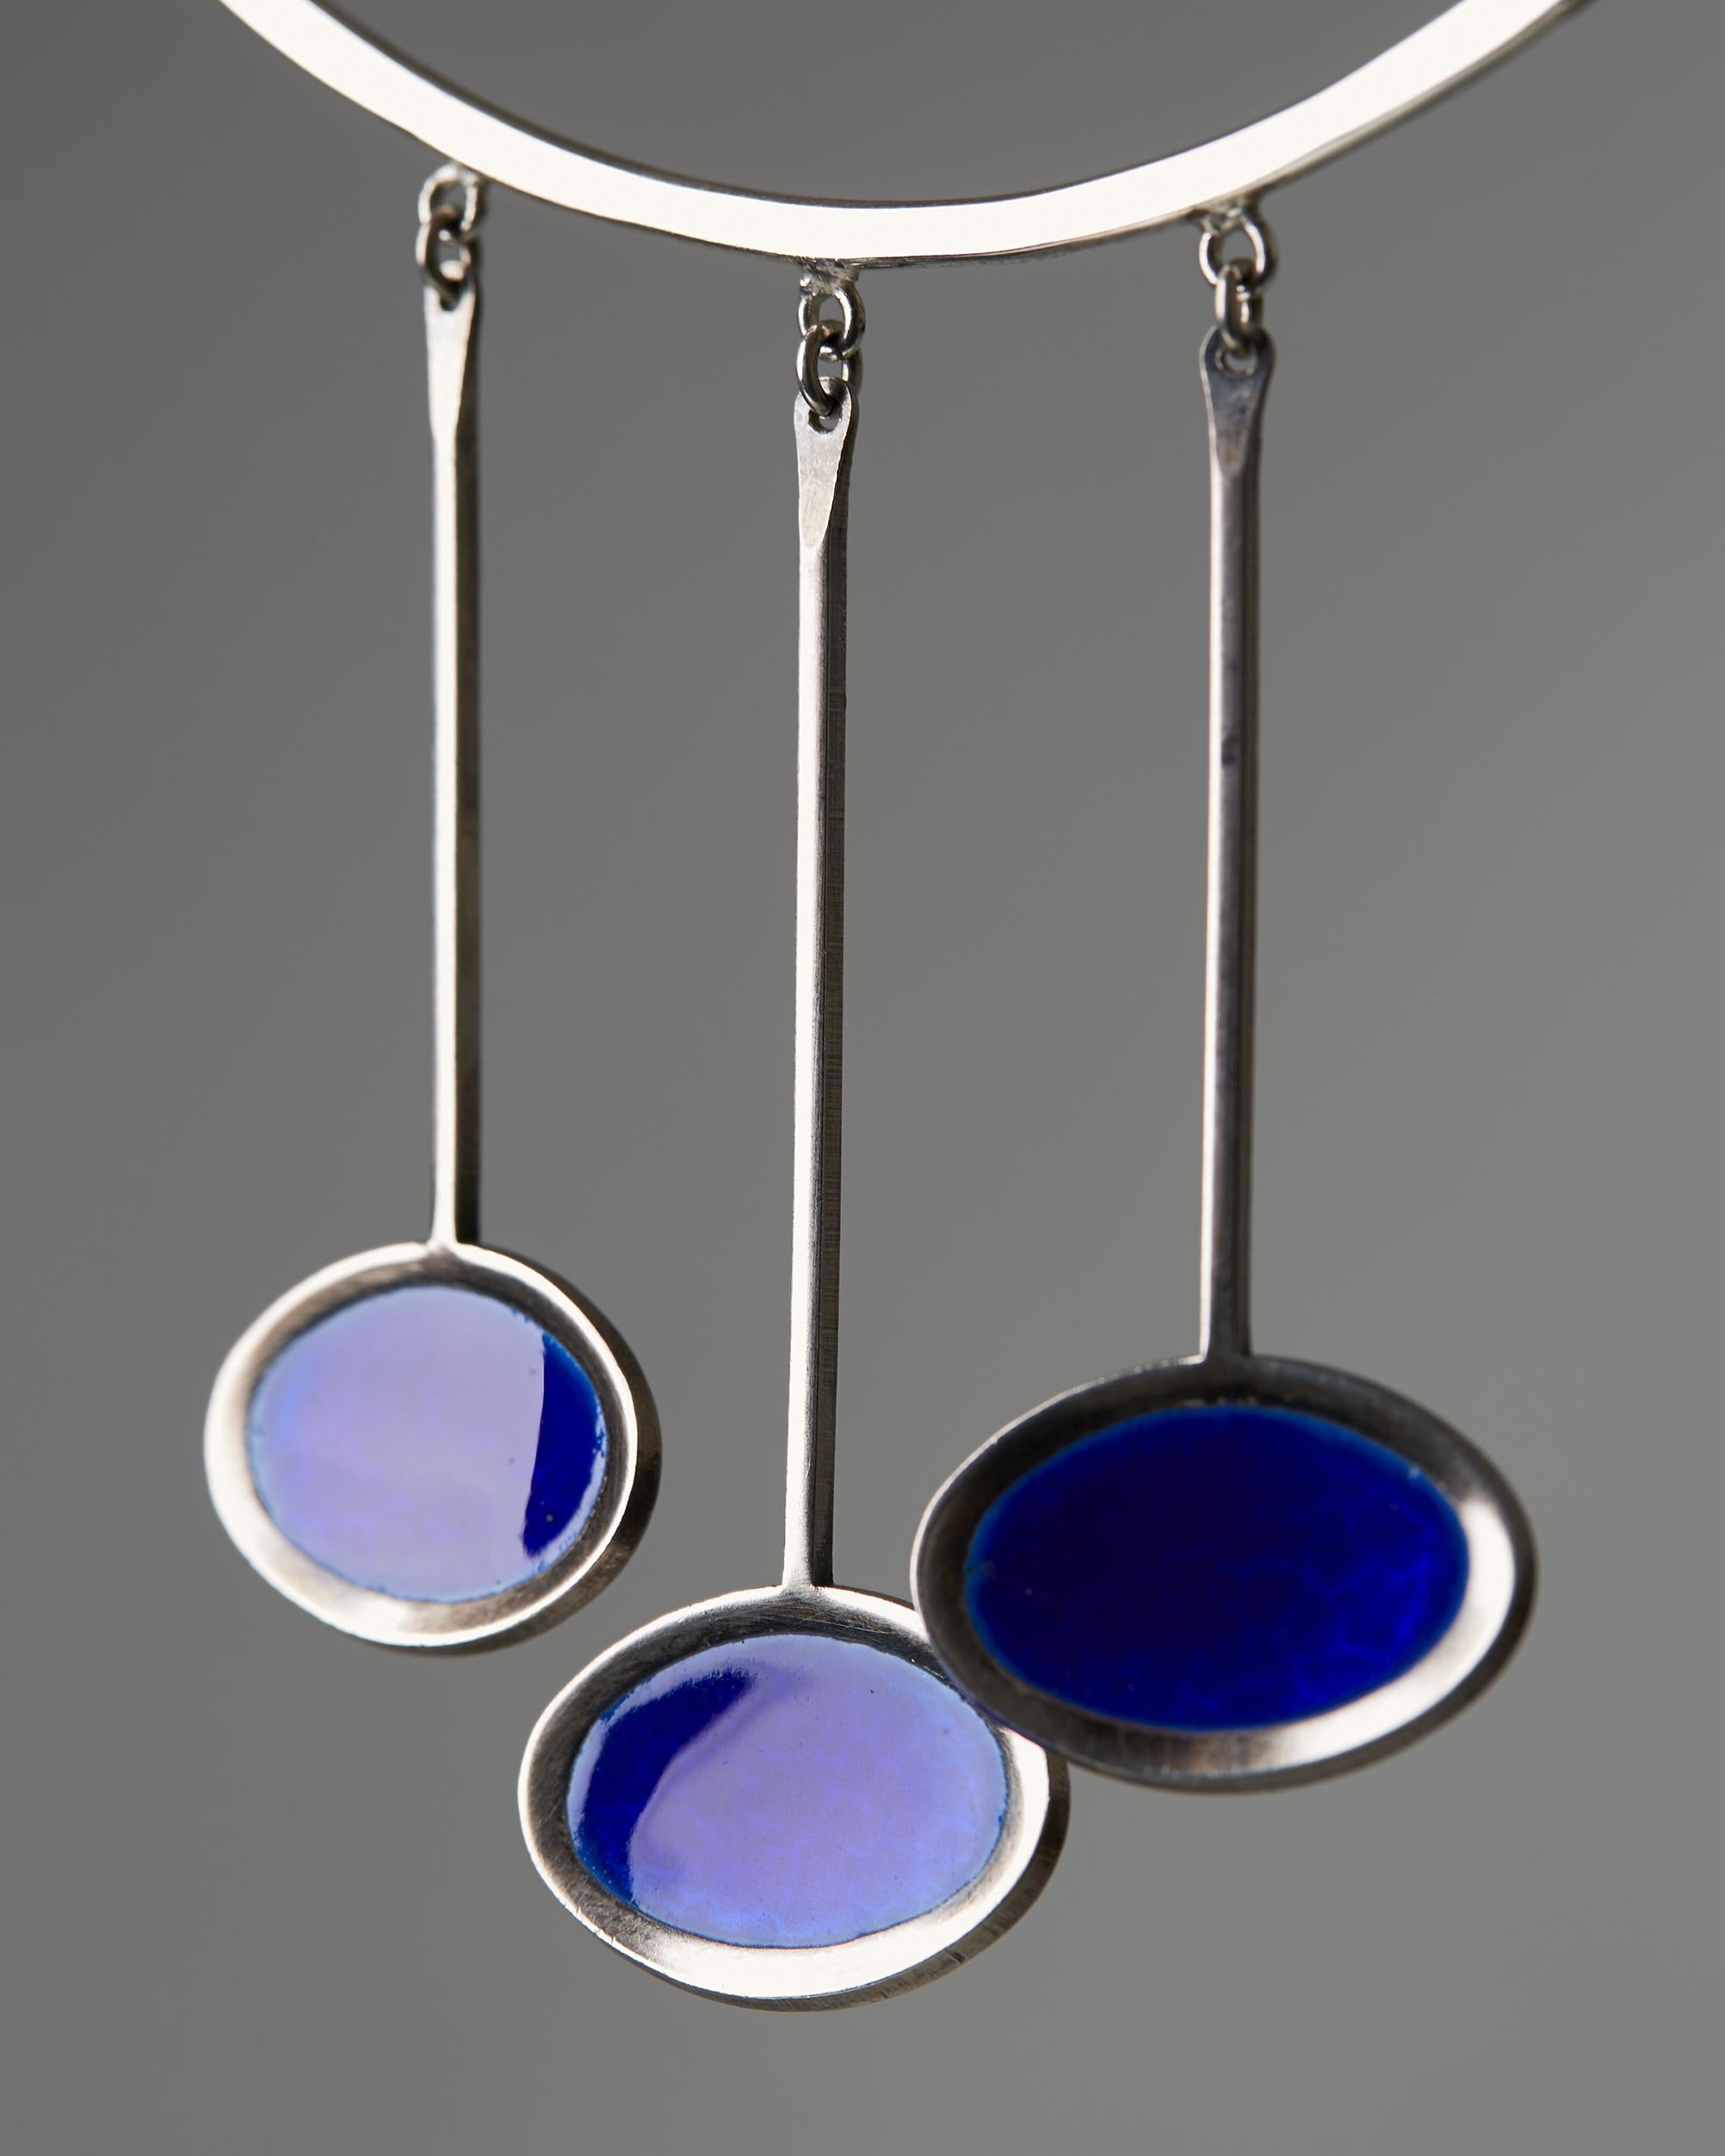 Necklace and Two Pairs of Earrings Designed by Gine Sommerfeldt for J. Tostrup 3